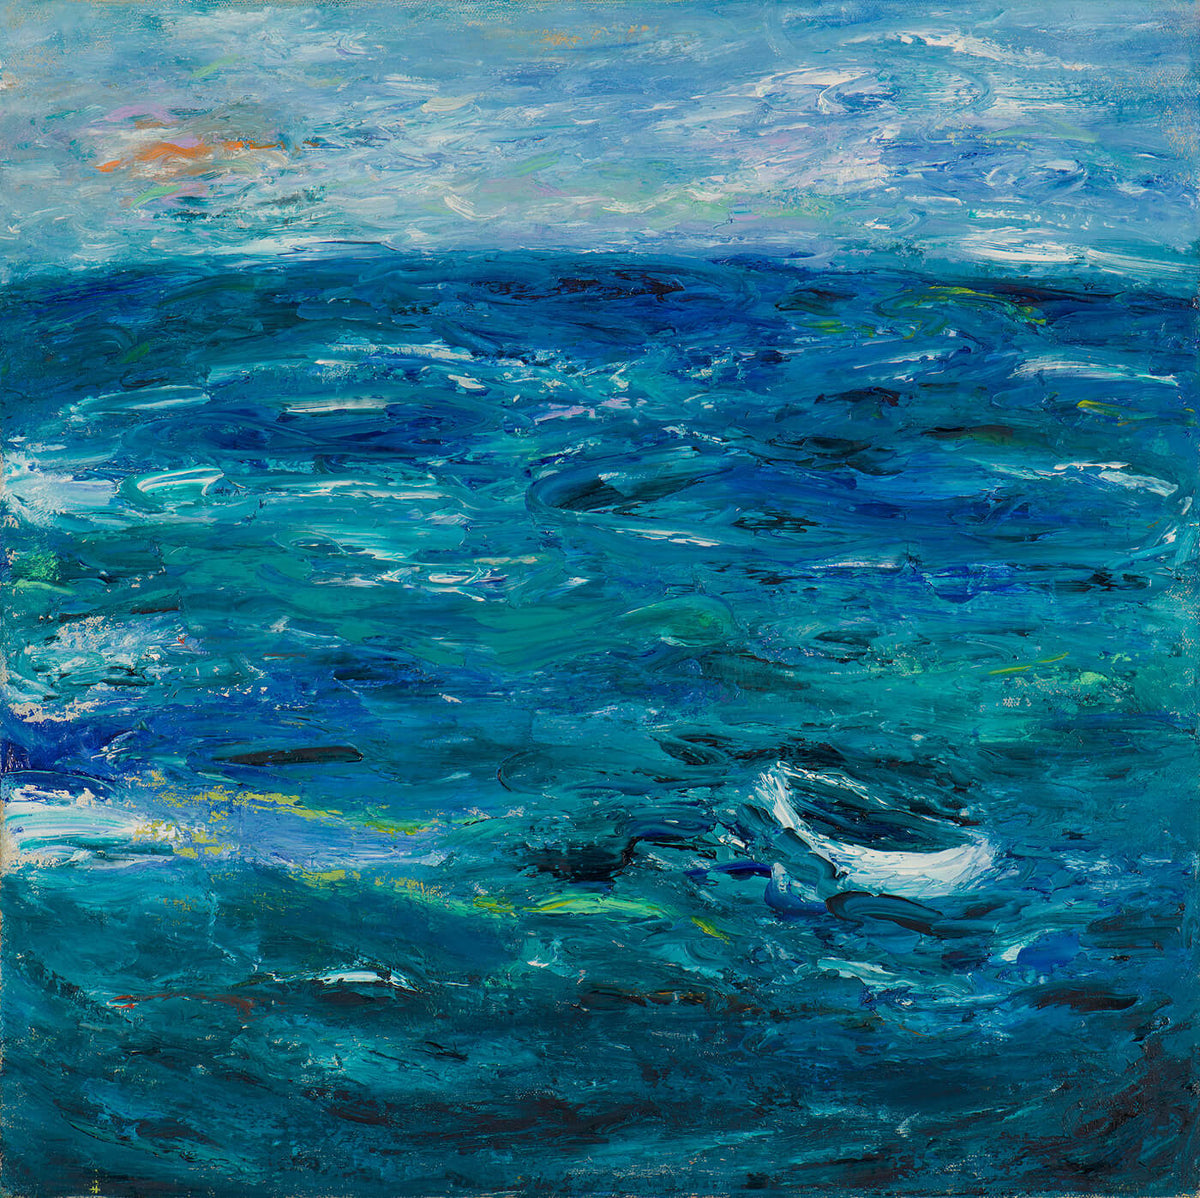 Contemporary Impressionistic Art, deep blue color , strong with emotion and senses